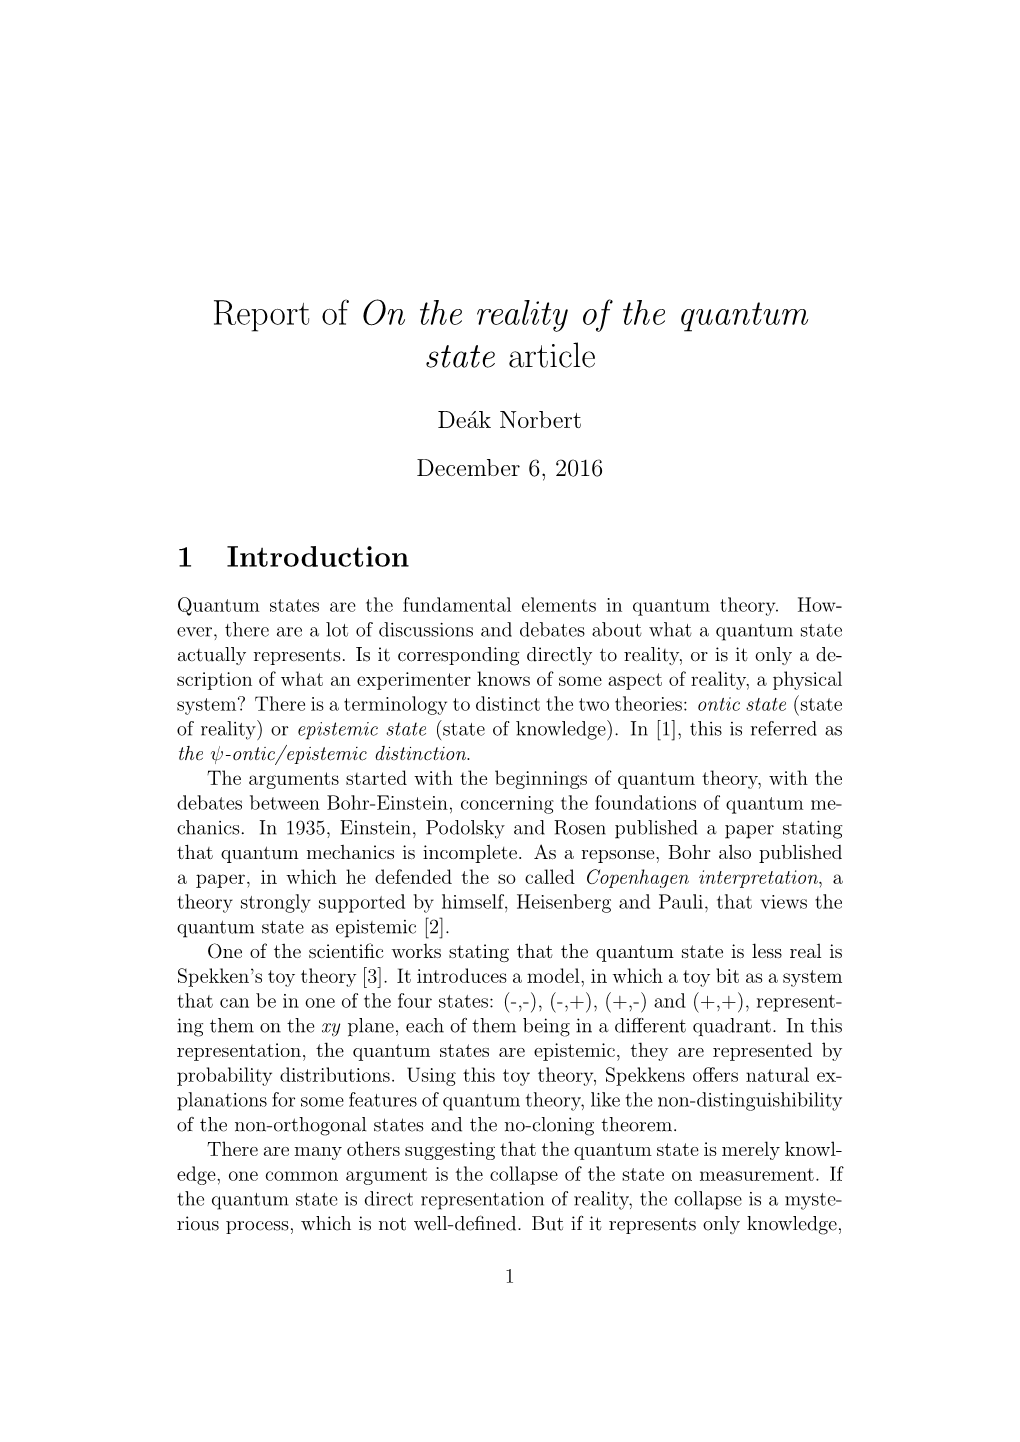 Report of on the Reality of the Quantum State Article